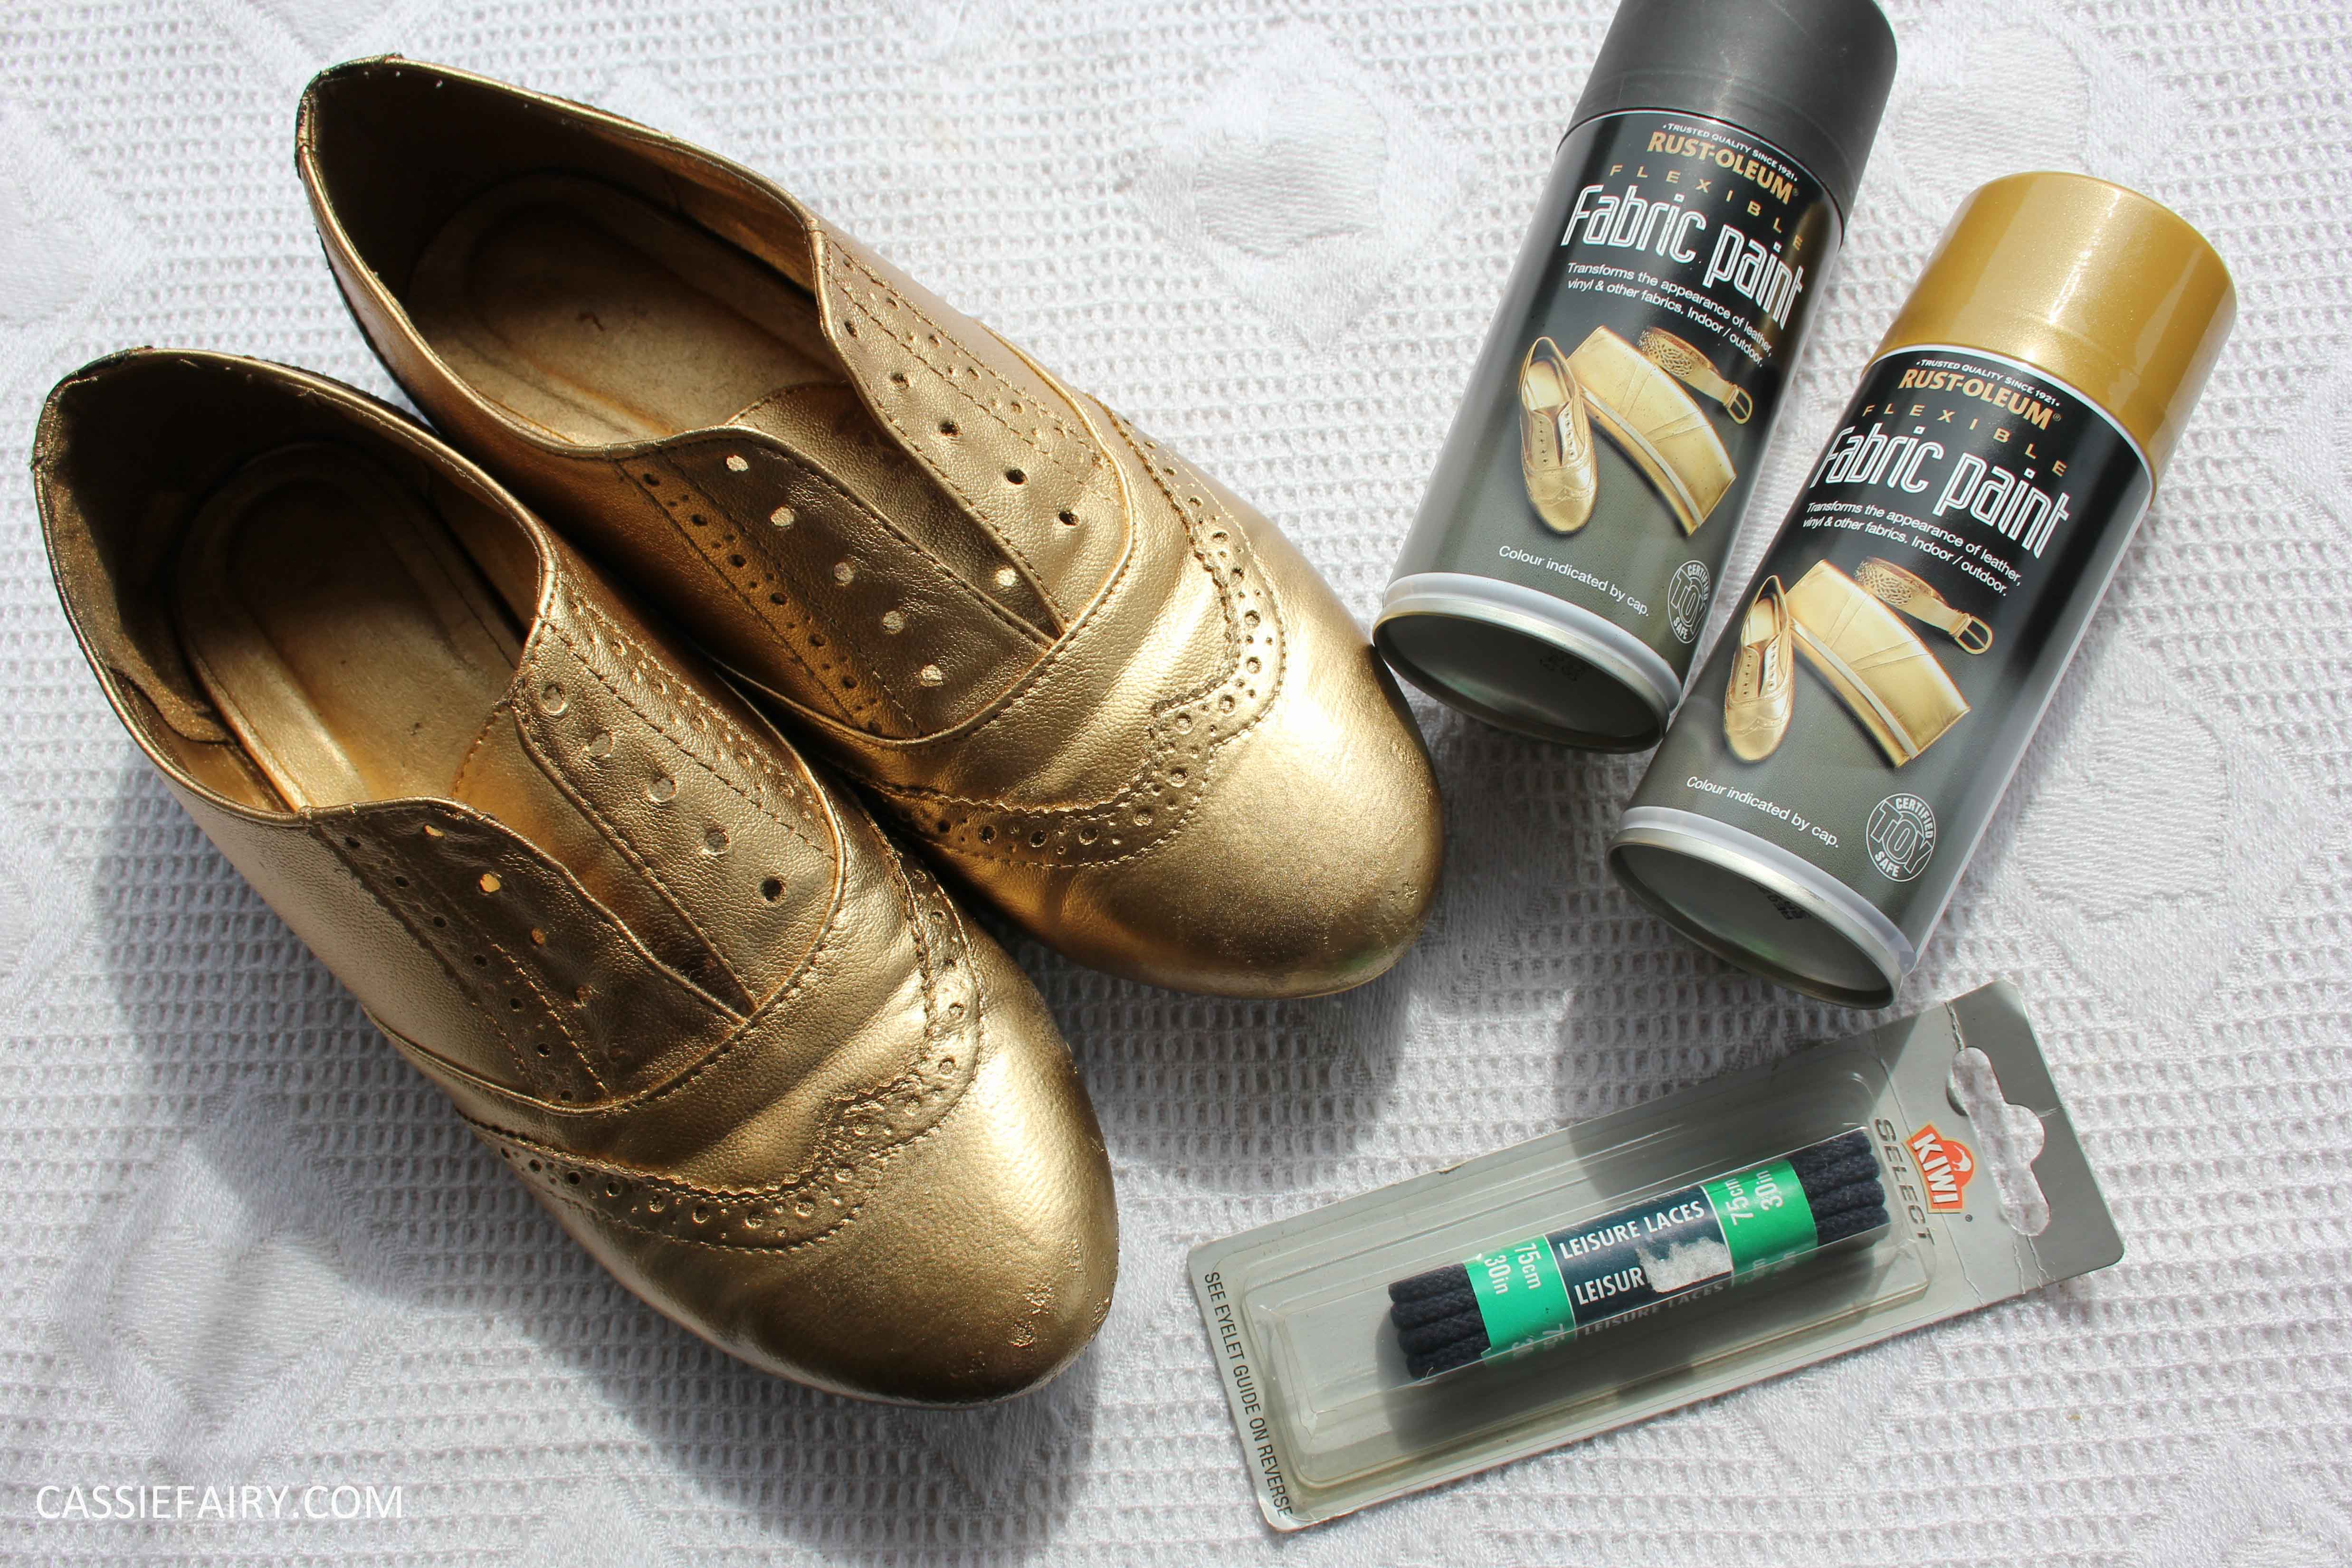 Pale Gold Spray Paint - shoe dye spray for leather shoes and boots